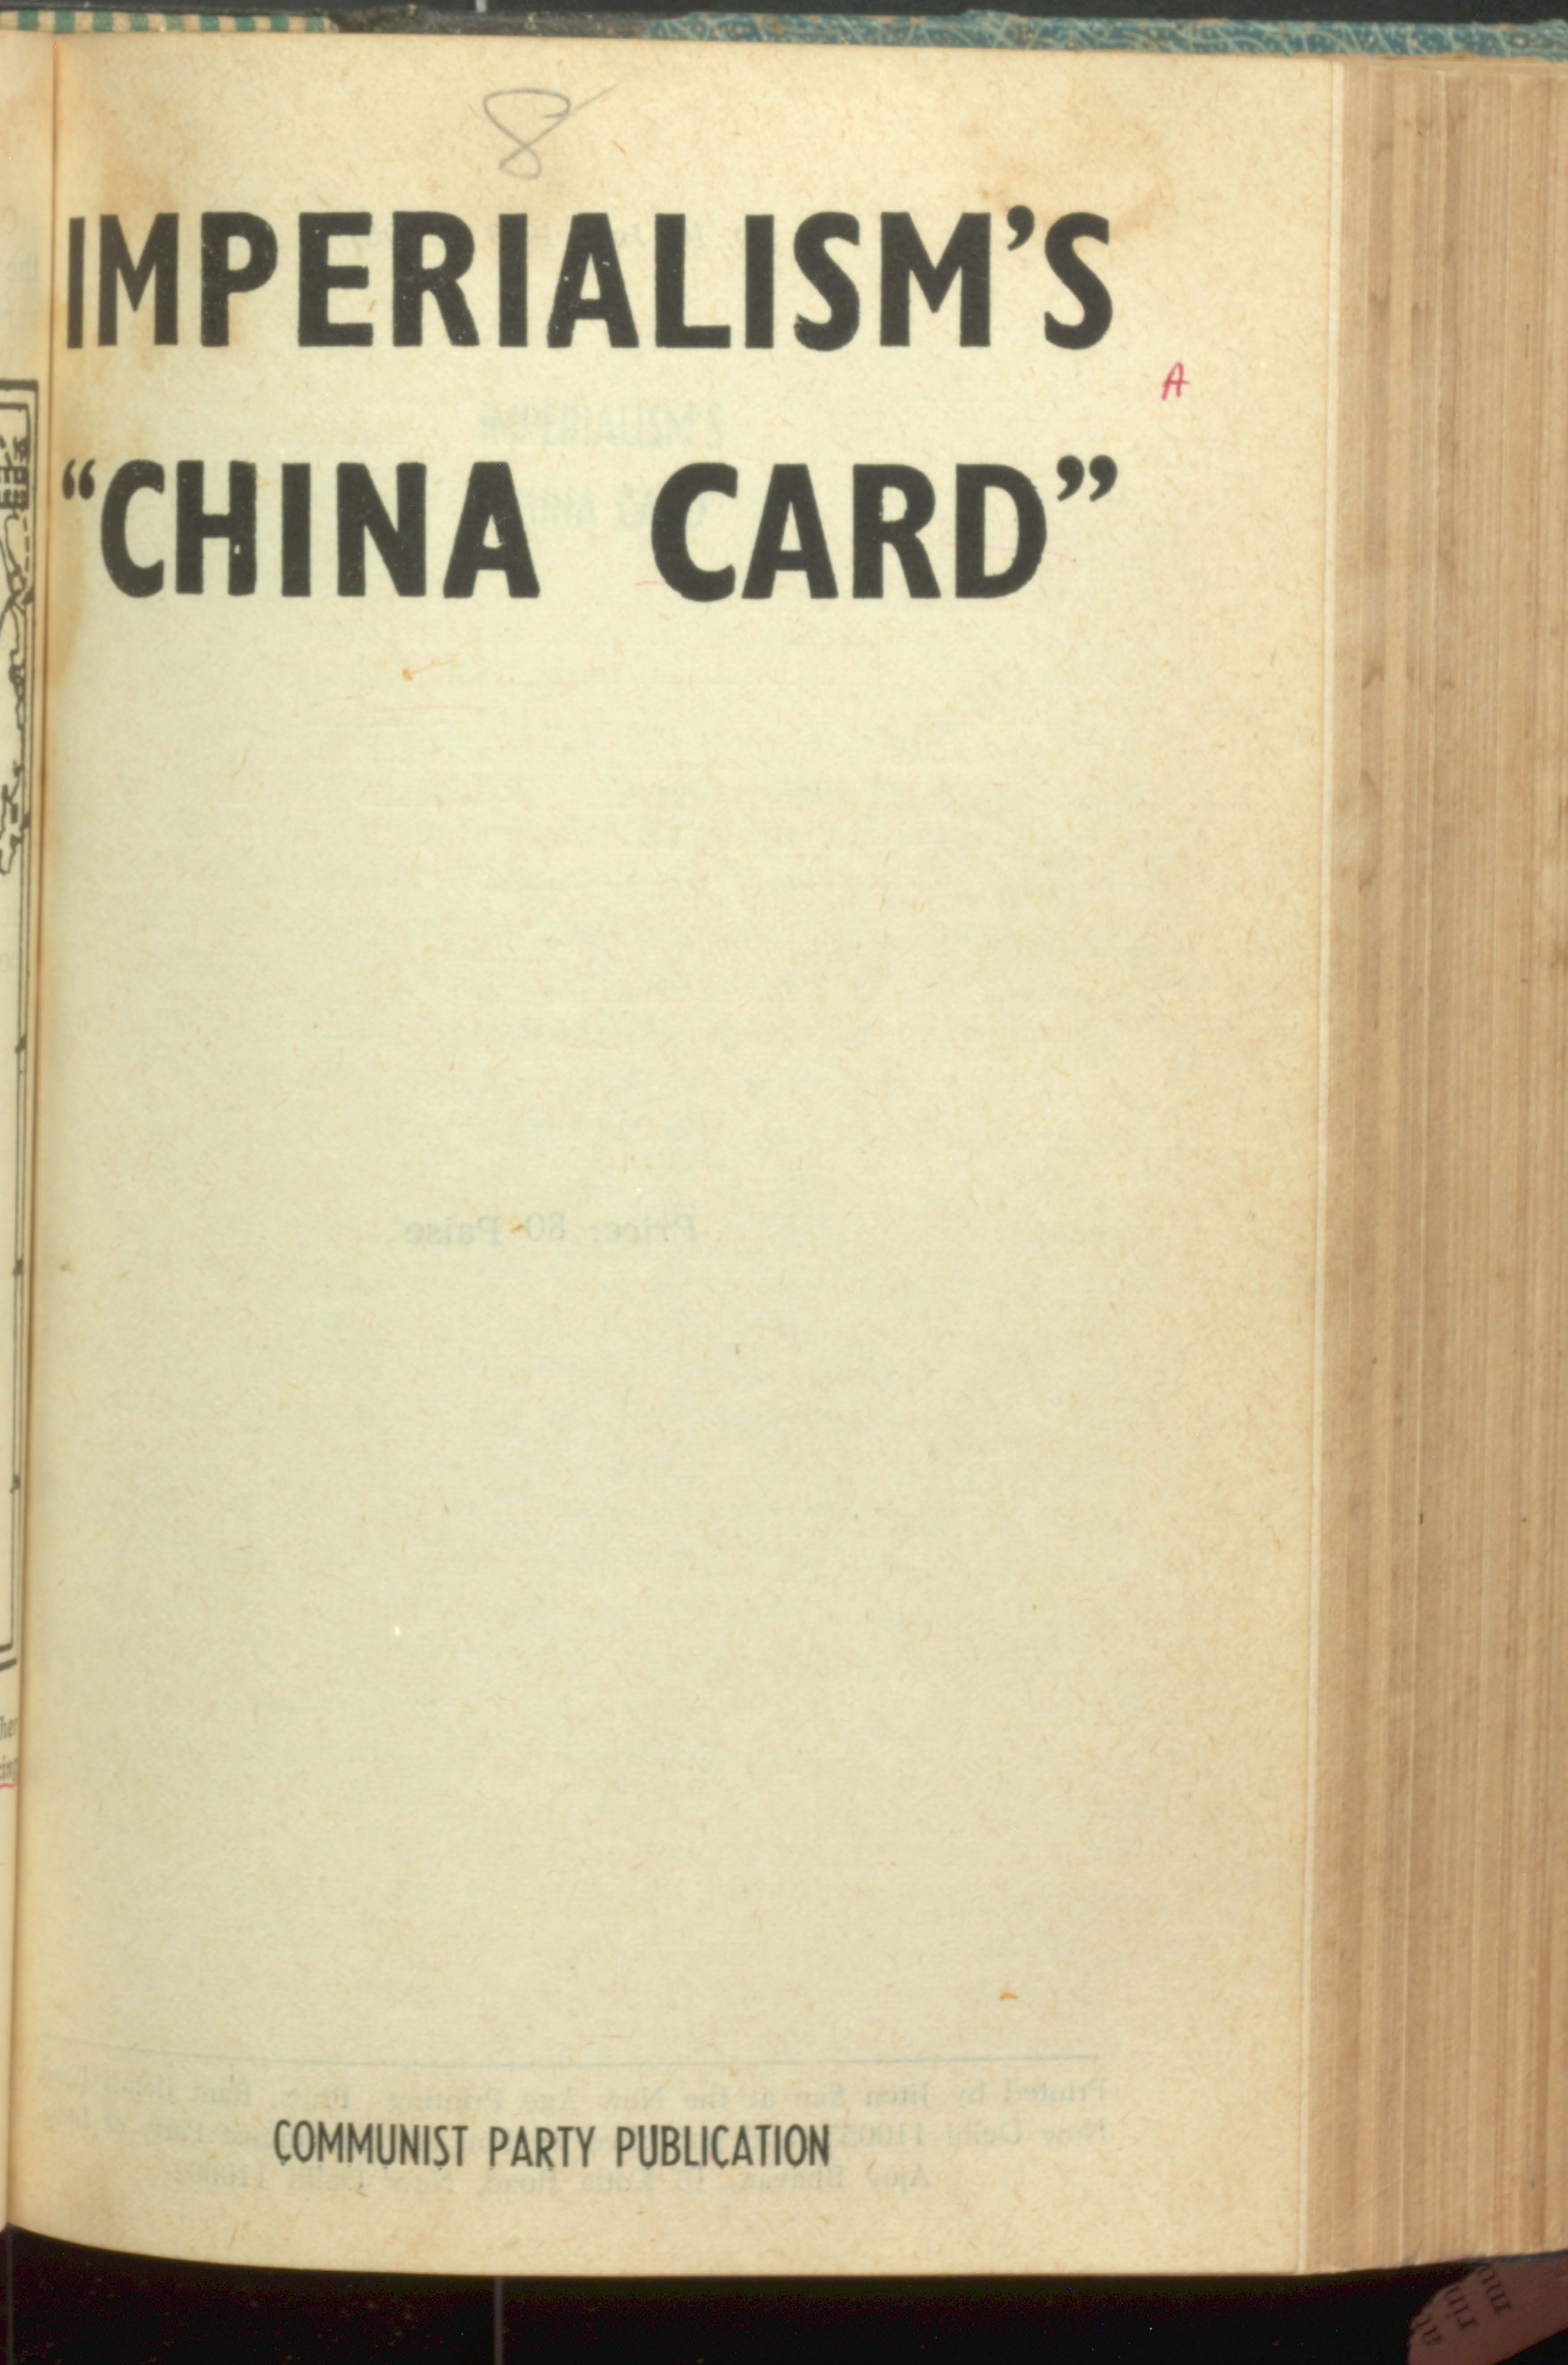 Imprialism's "china card"